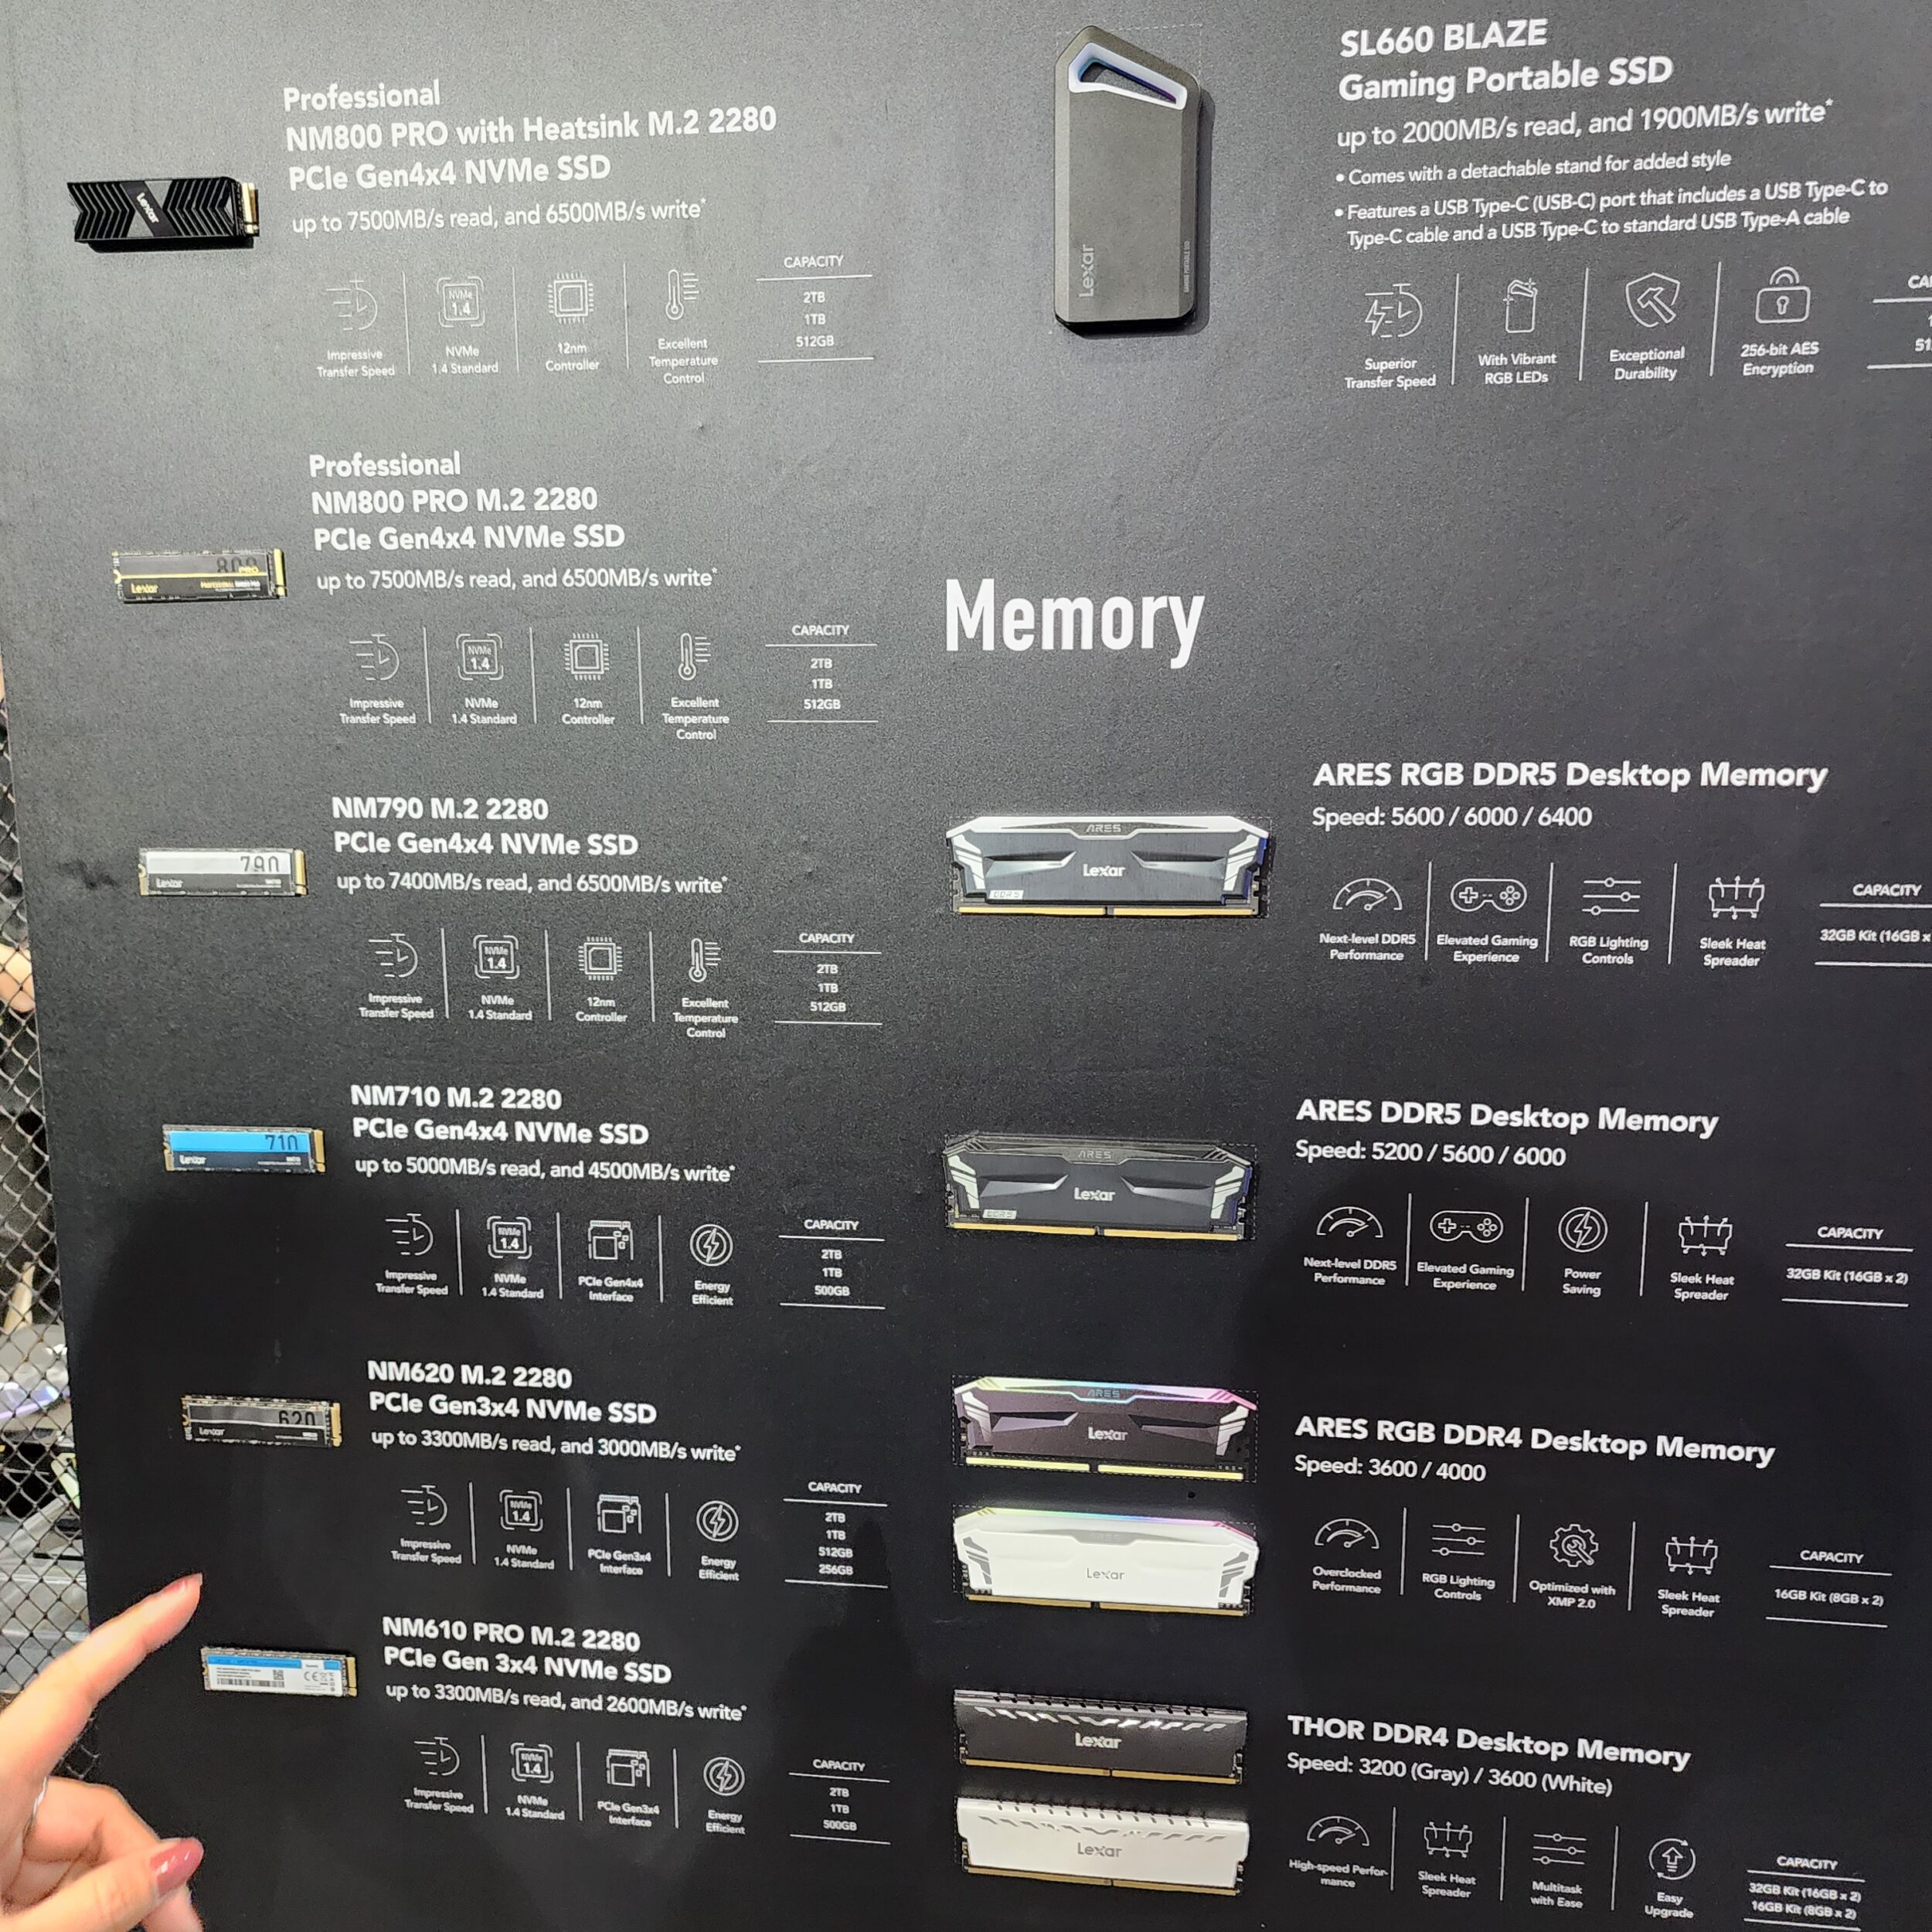 LEXAR Shows Off Full Line-up of Consumer SSDs and Storage Products at COMPUTEX 2023 -